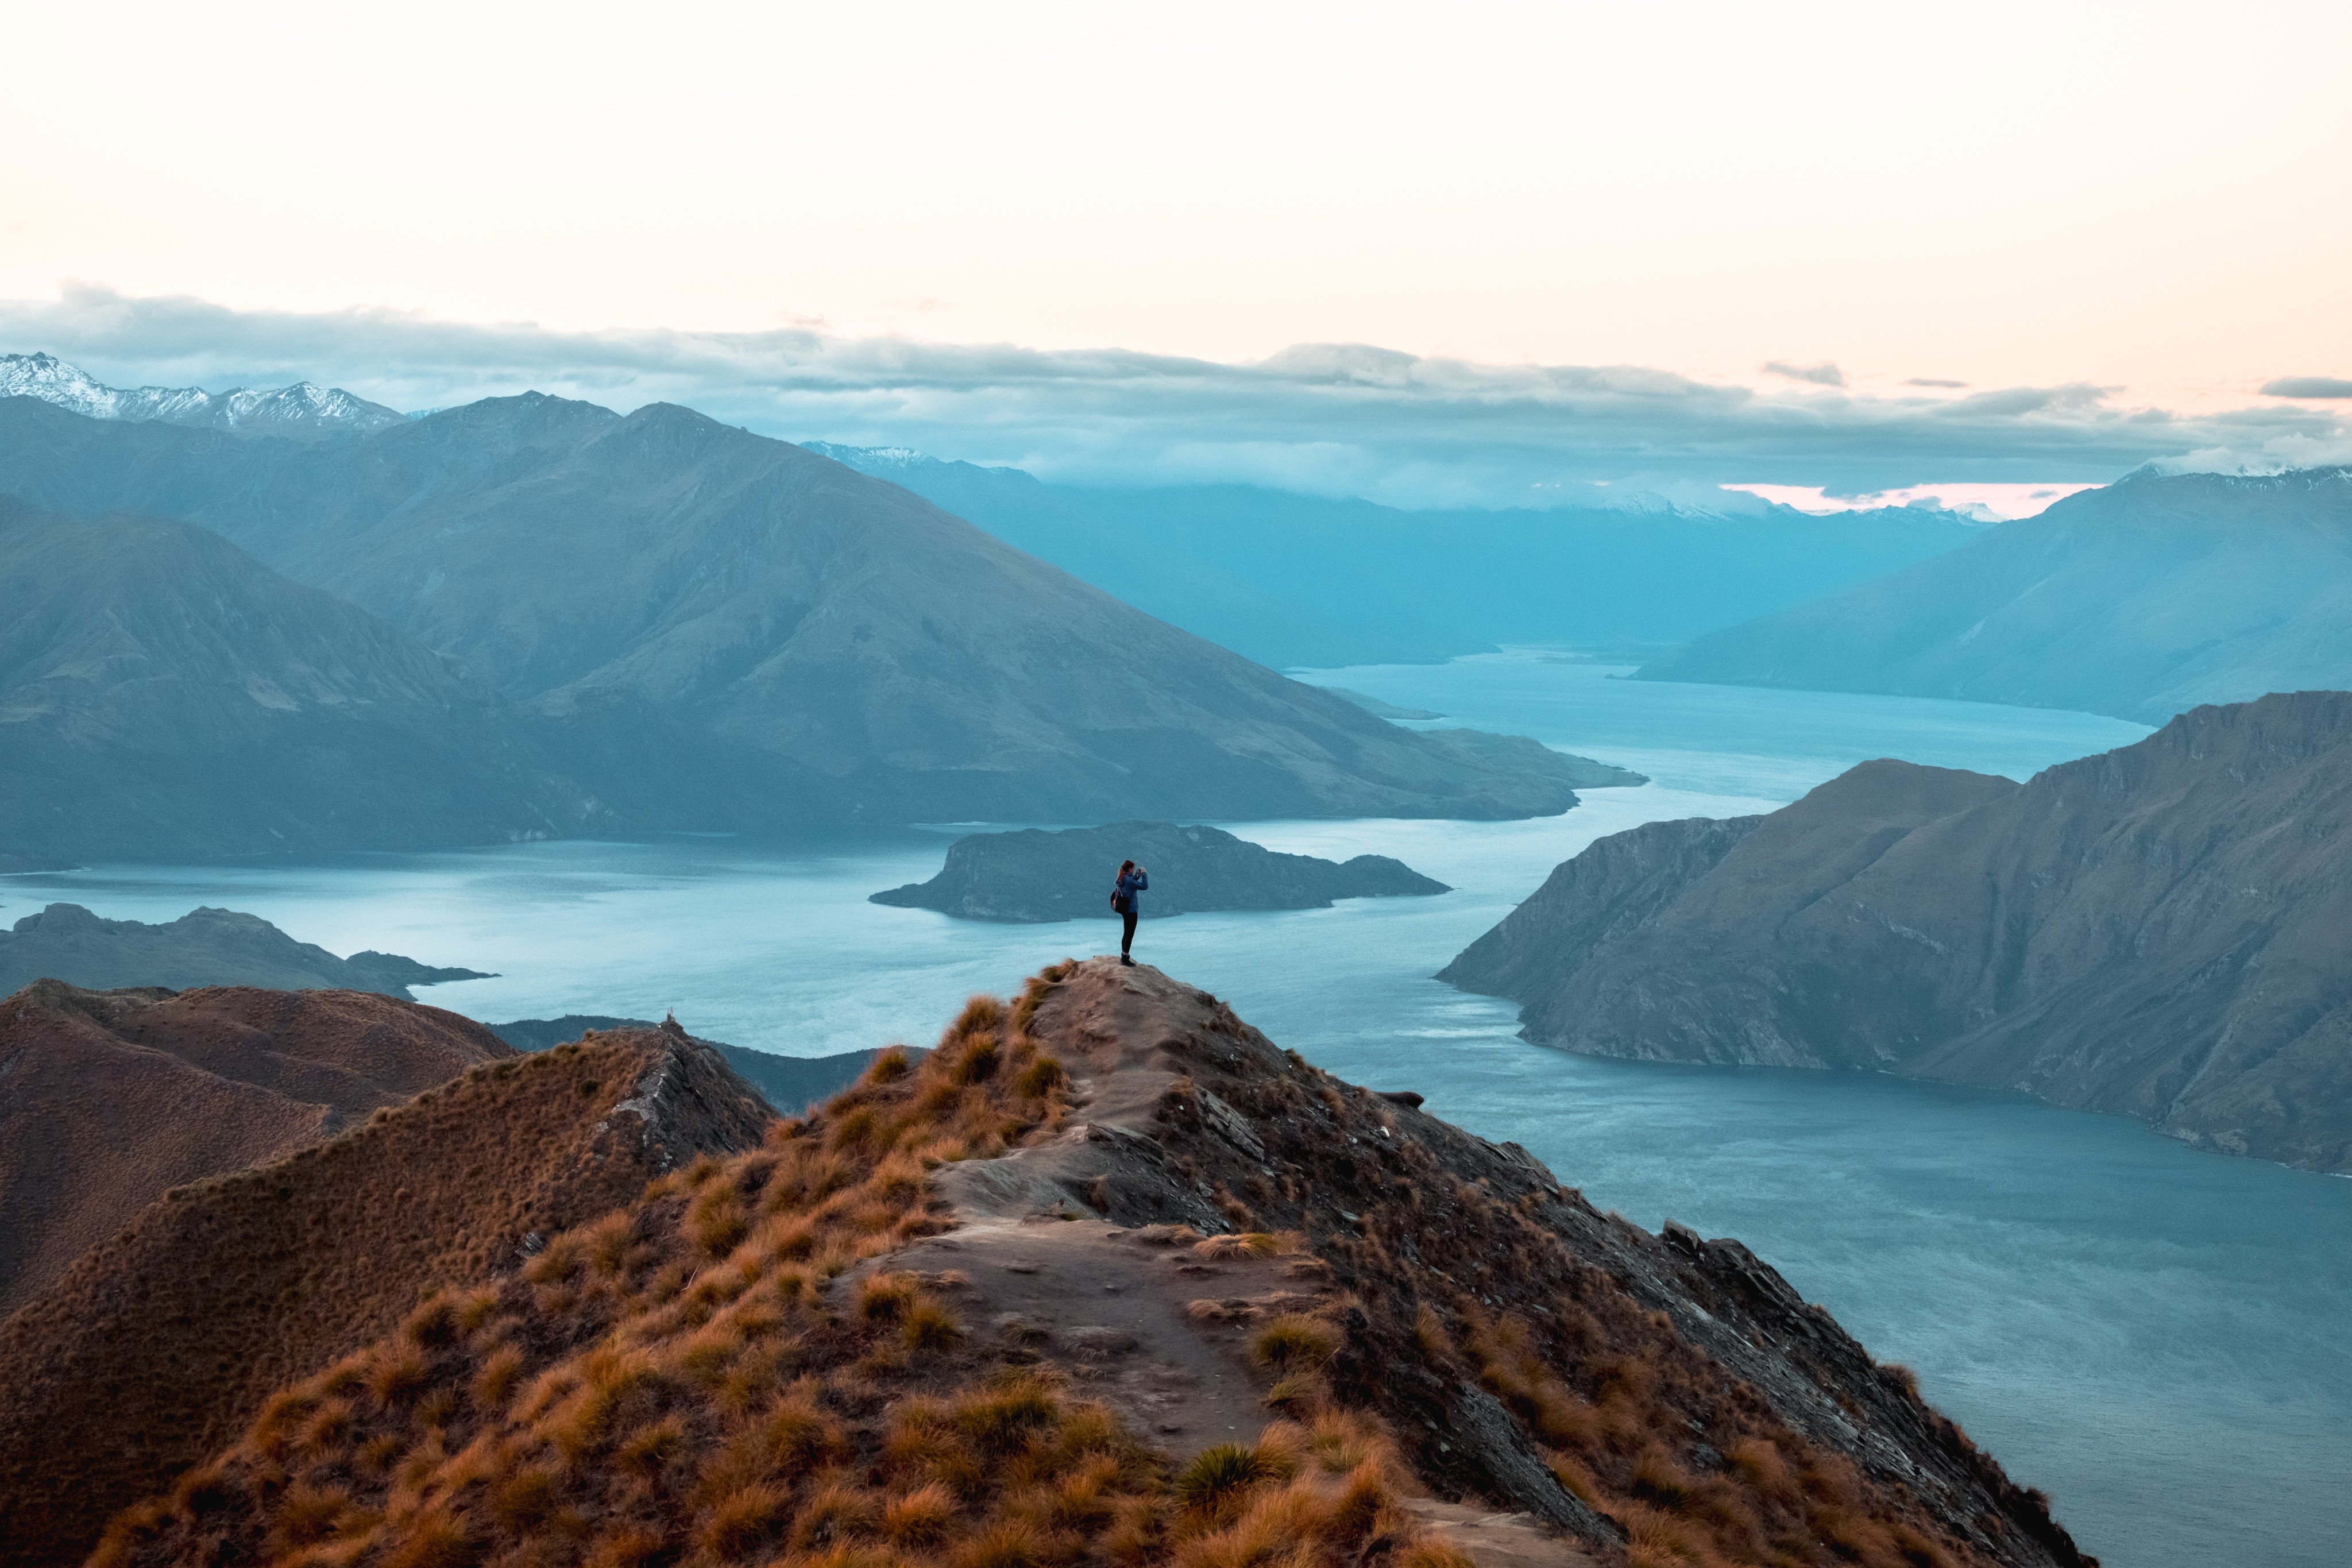 While New Zealand is remote, it is certainly not immune to issues faced by other nations. Photo: Shutterstock